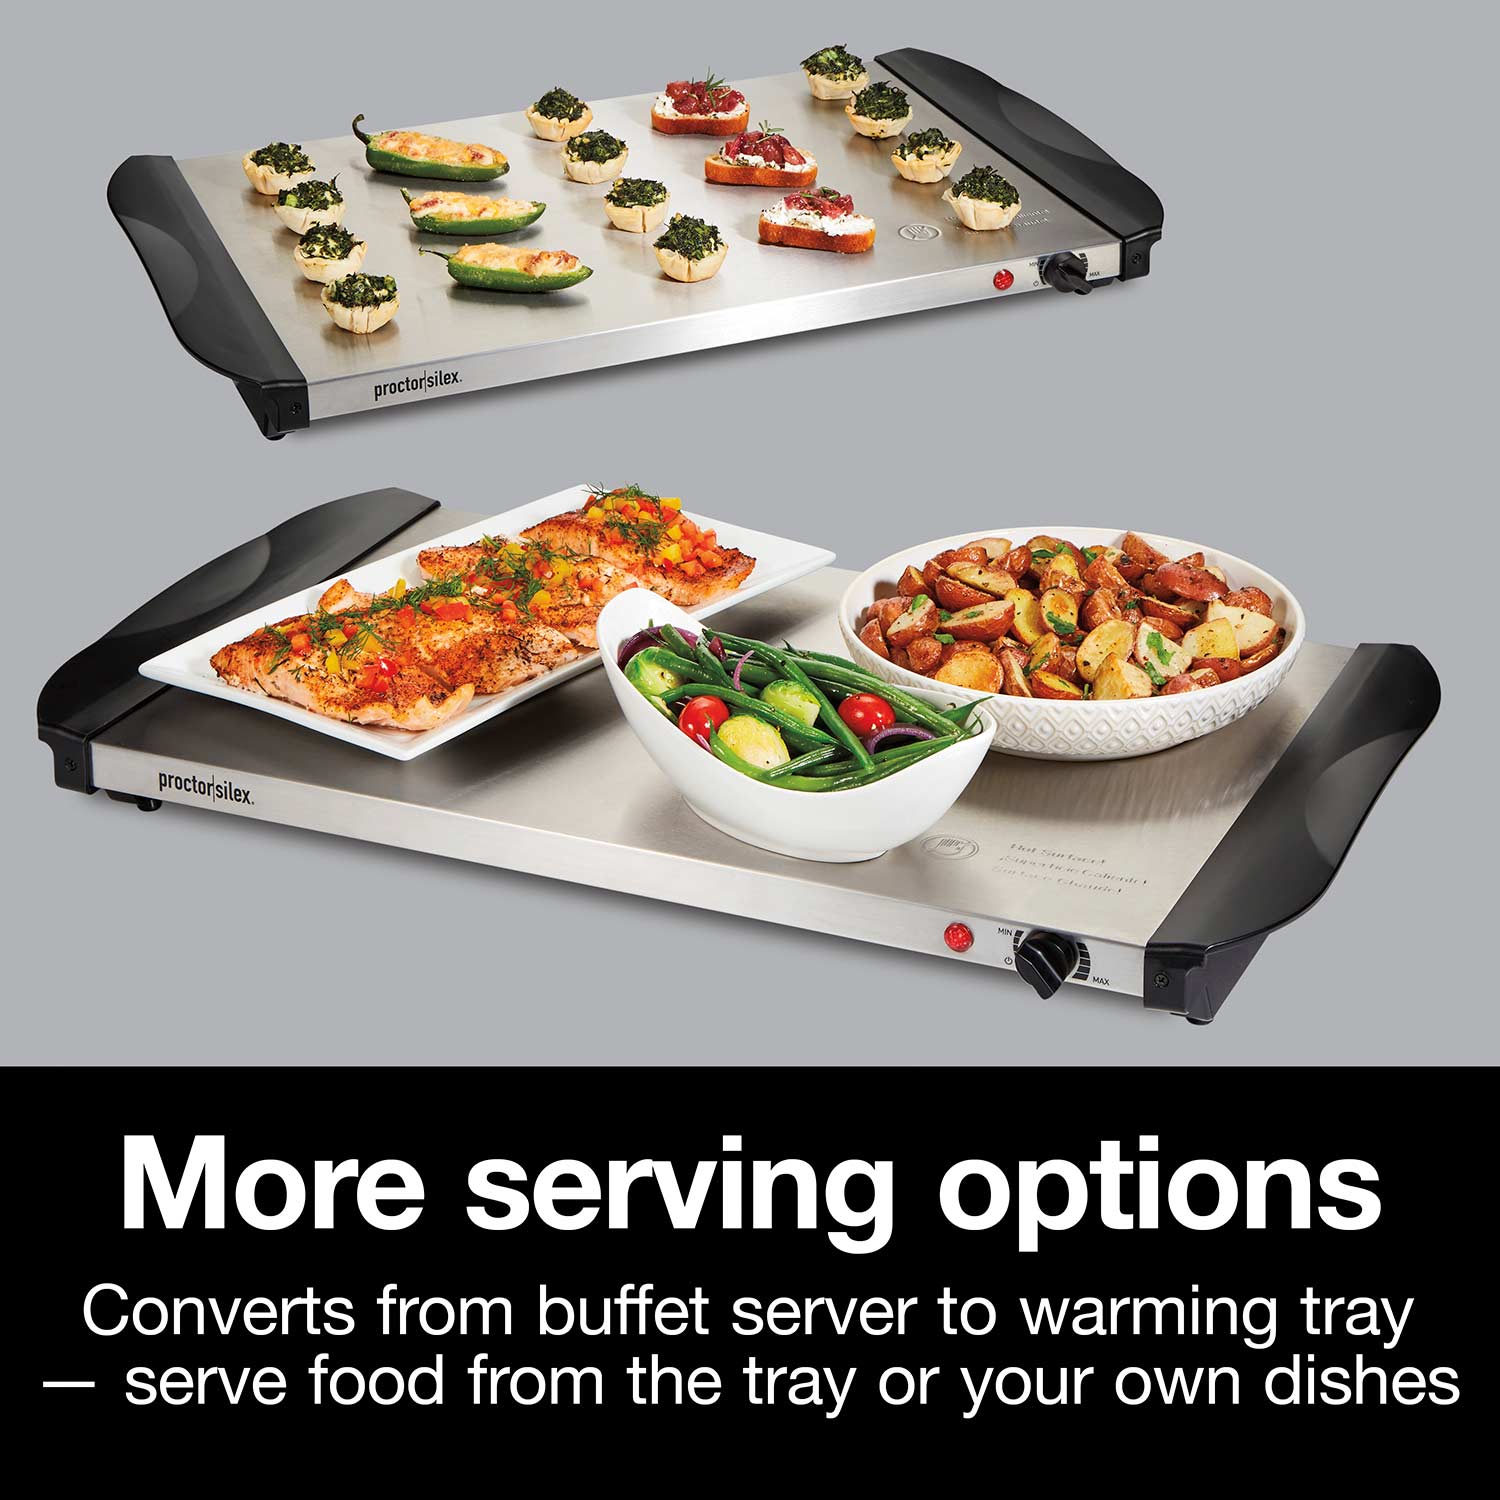 4 SECTION ELECTRIC FOOD WARMER BUFFET SERVER TEMPERATURE HOT PLATE TRAY  COOKING